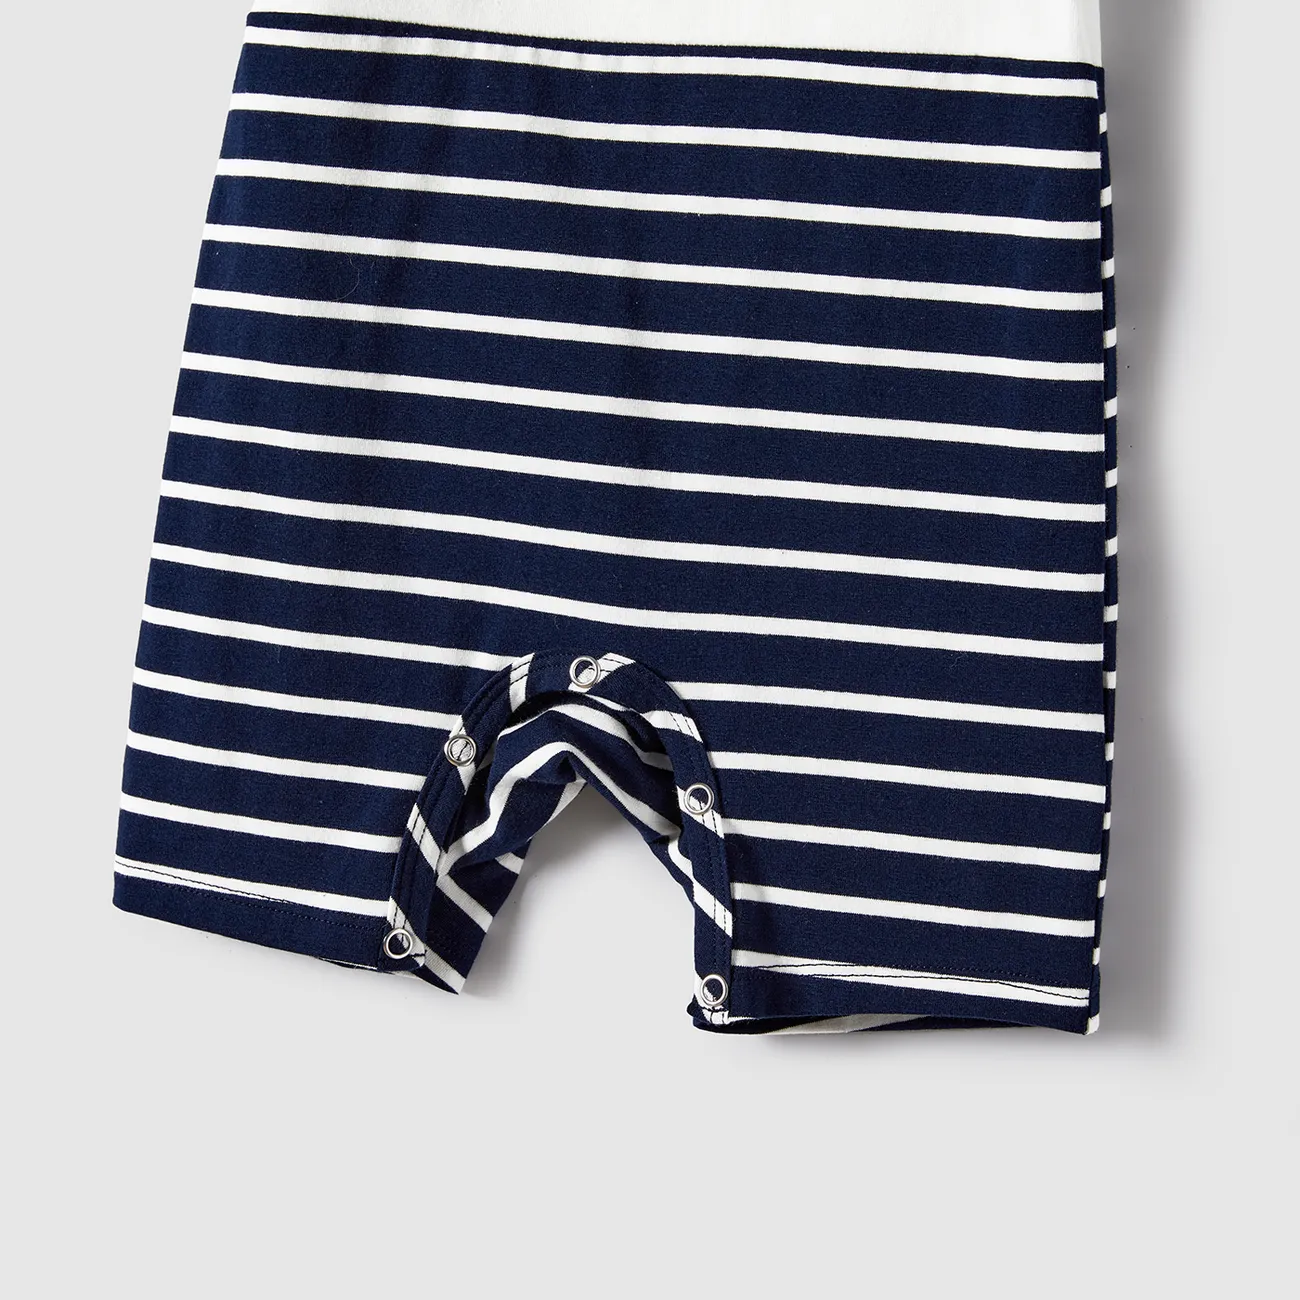 Family Matching Stripe Patched Pocket Belted Dresses and Colorblock Striped T-shirts Sets royalblue big image 1